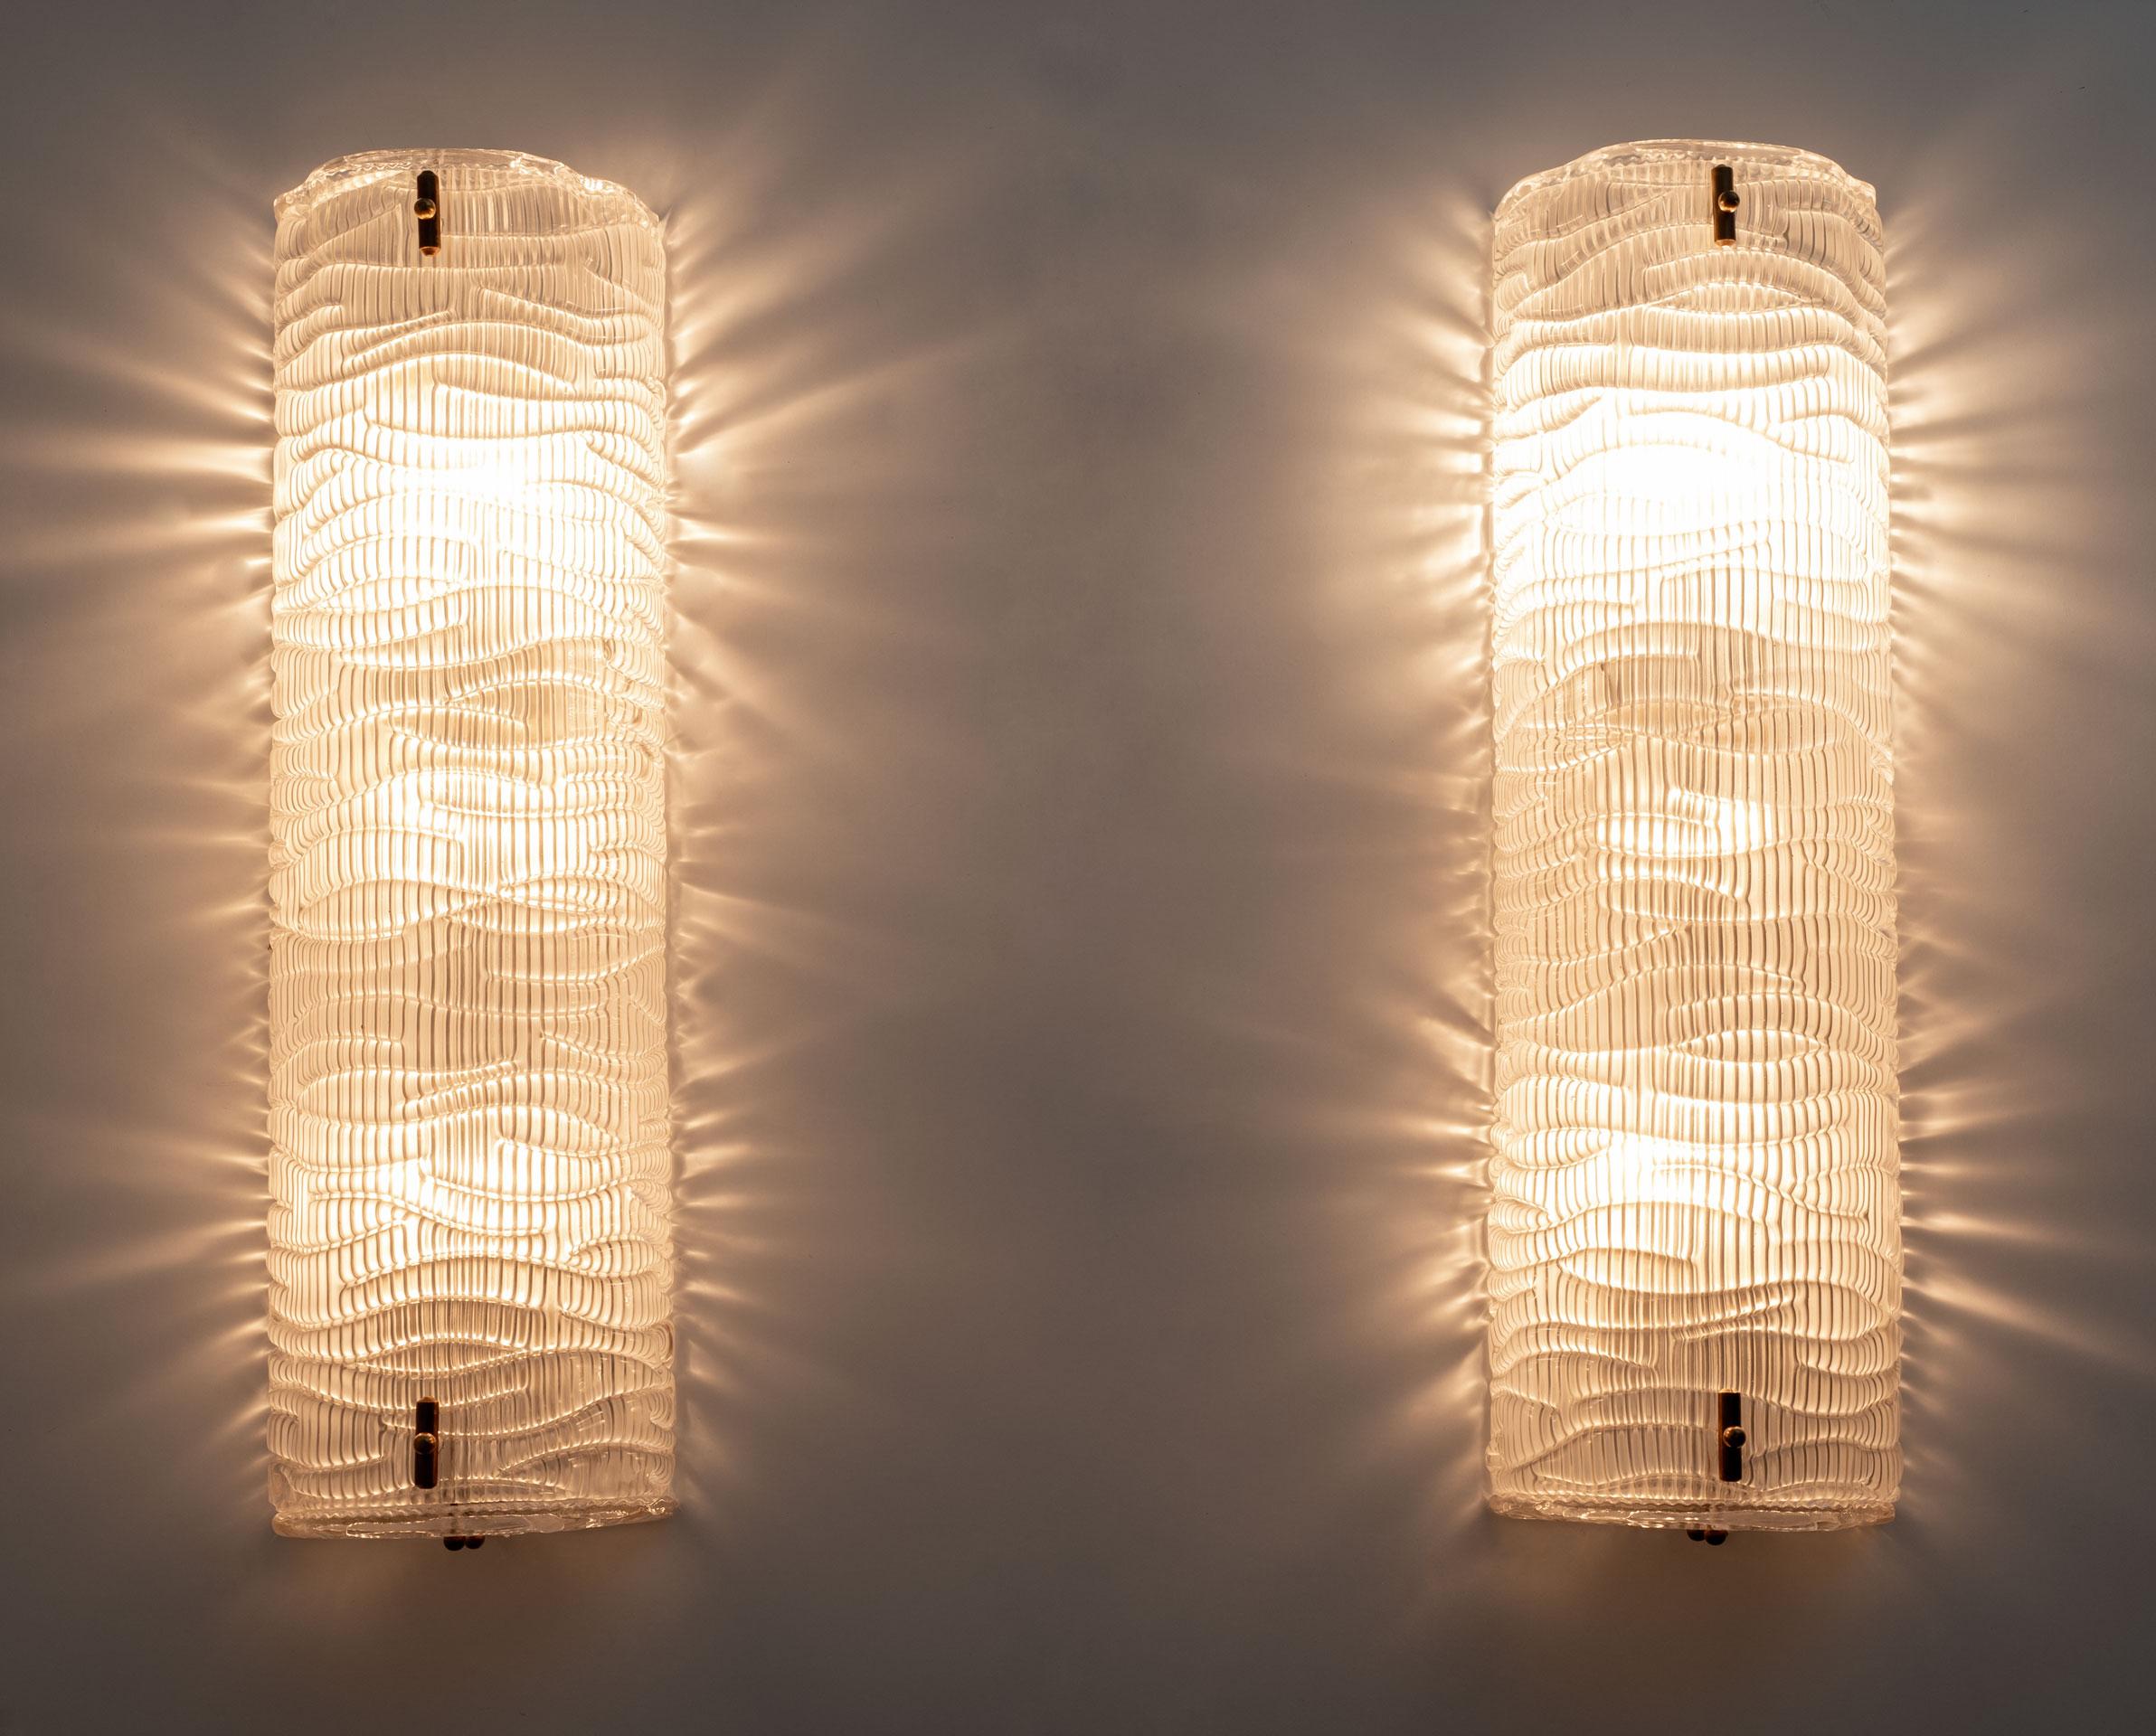 Pair of wall lamps in structured Murano glass. The glass is textured with ribs and has a curved design, creating a superb decorative impact, completely enclosed by glass plates, above and below. Each wall light requires three medium base bulbs and